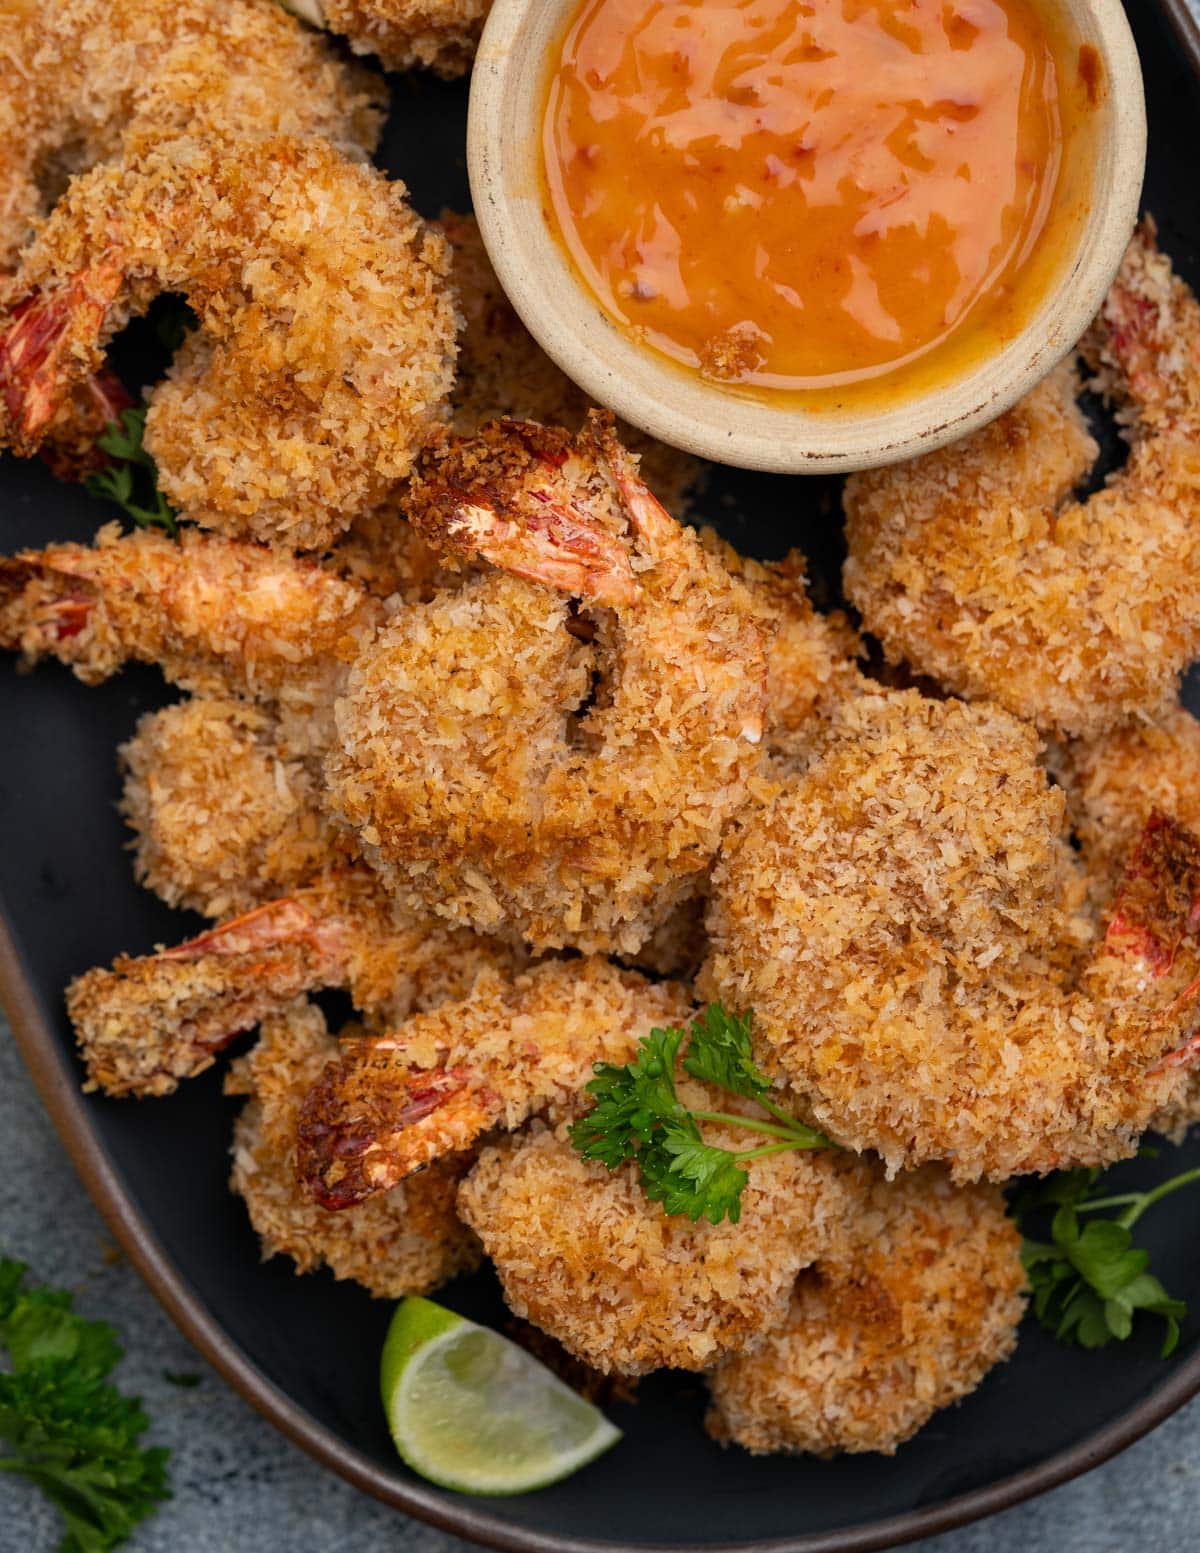 Coconut Shrimp served with sweet and Spicy Mayo dip.